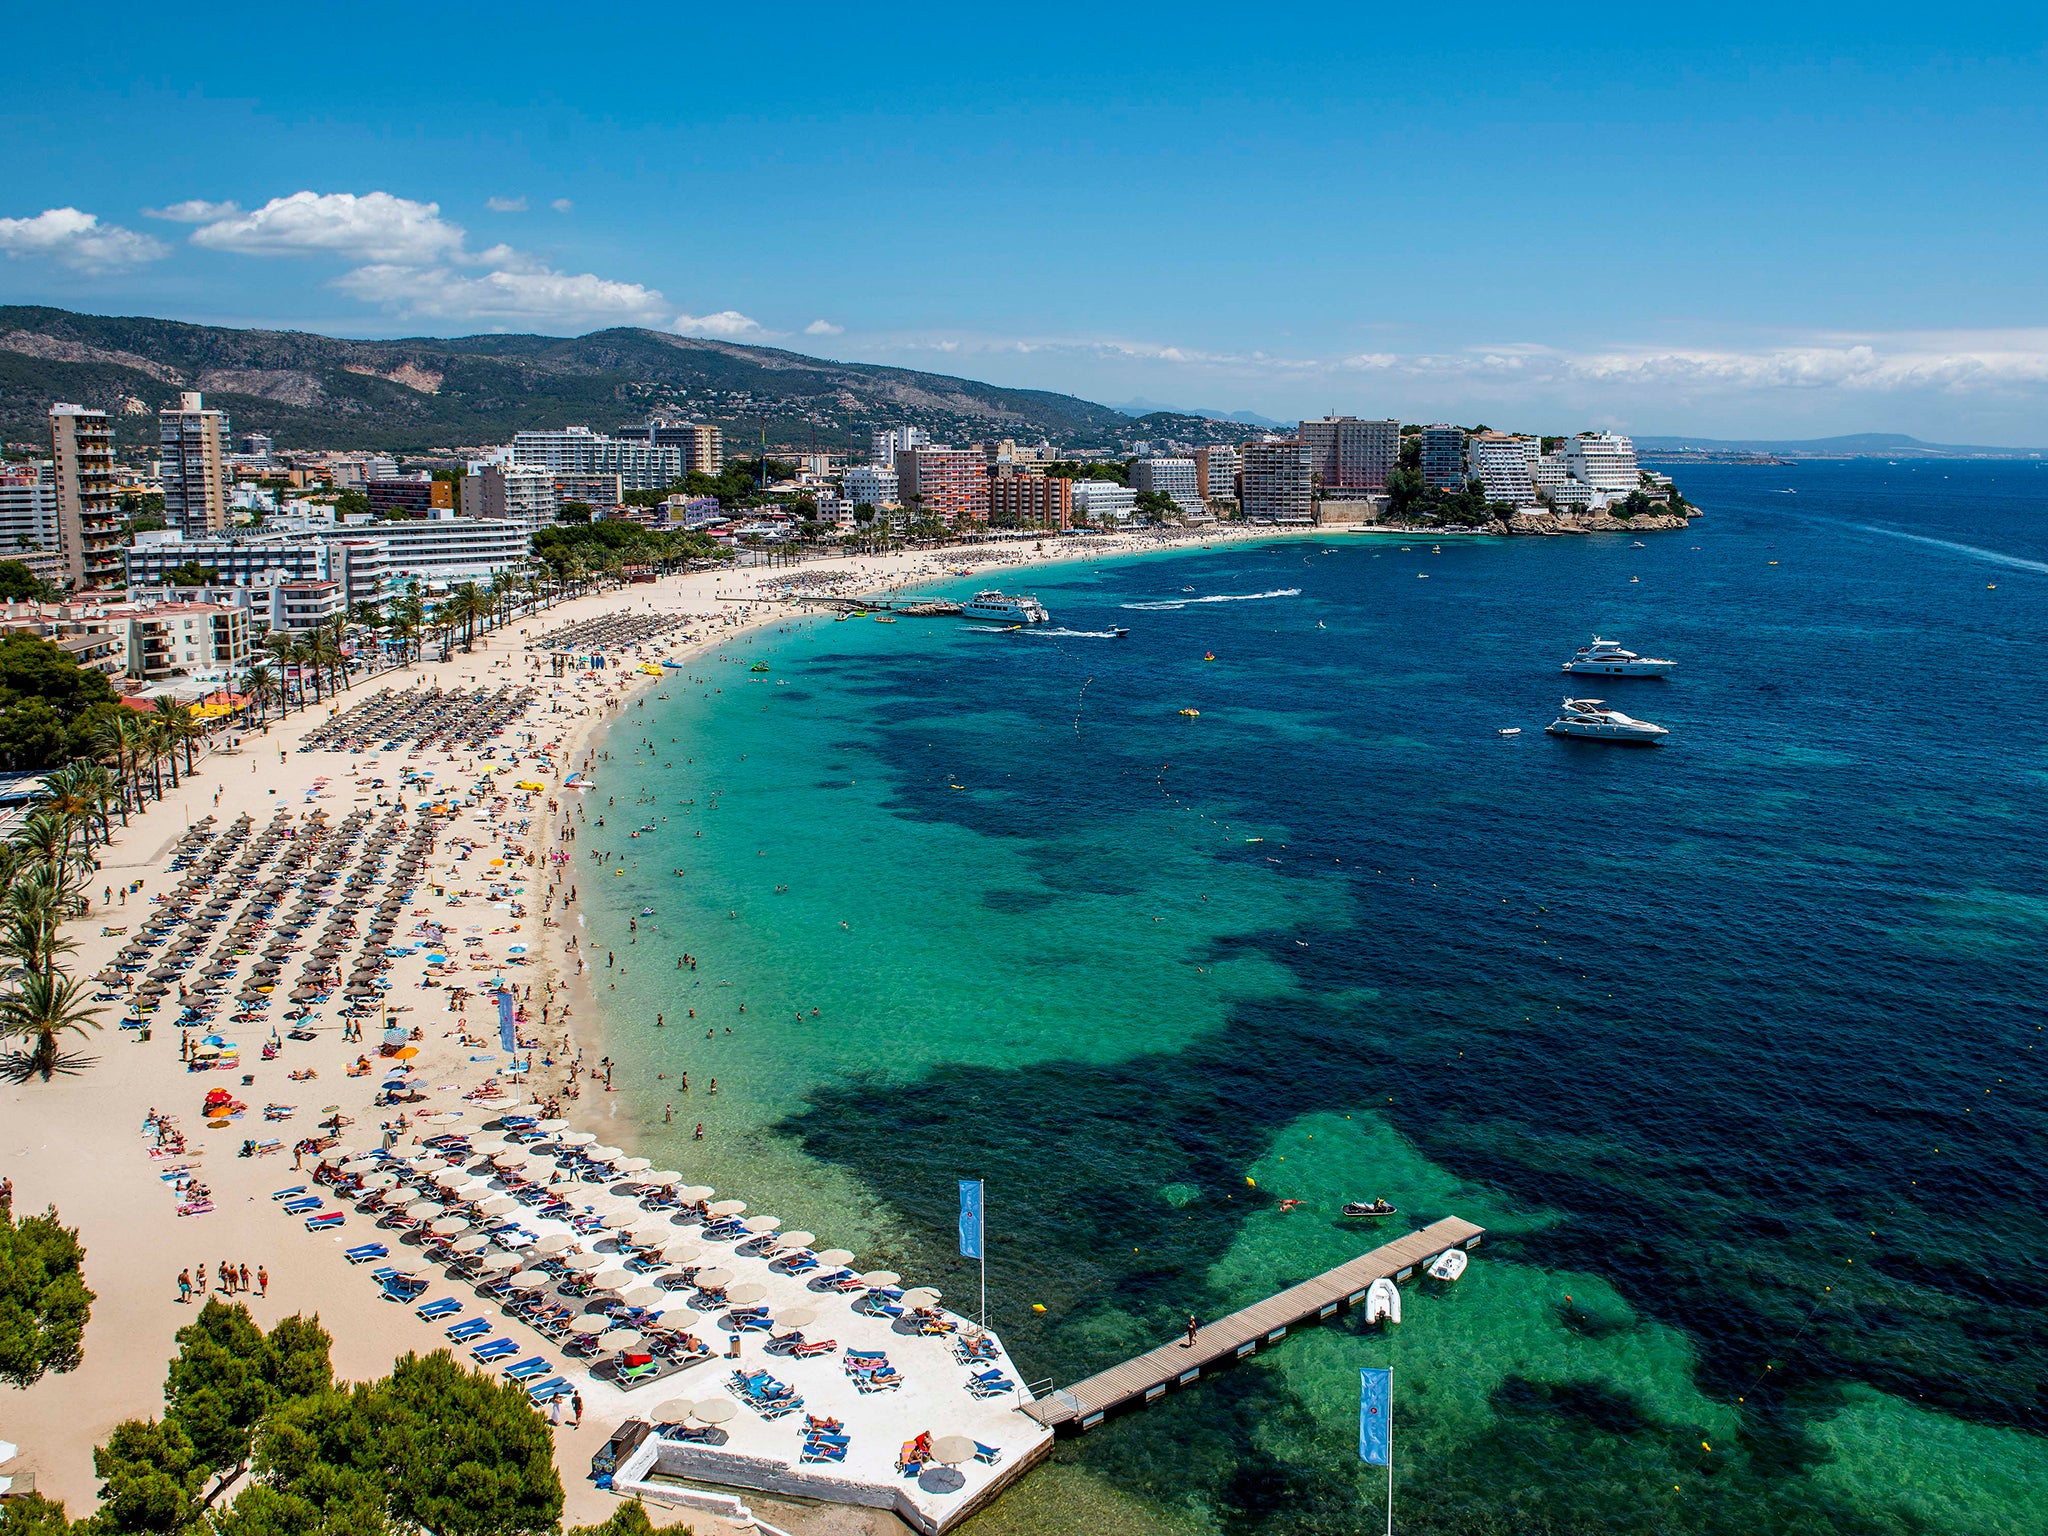 Magaluf is one of the Britain's favorite holiday destinations